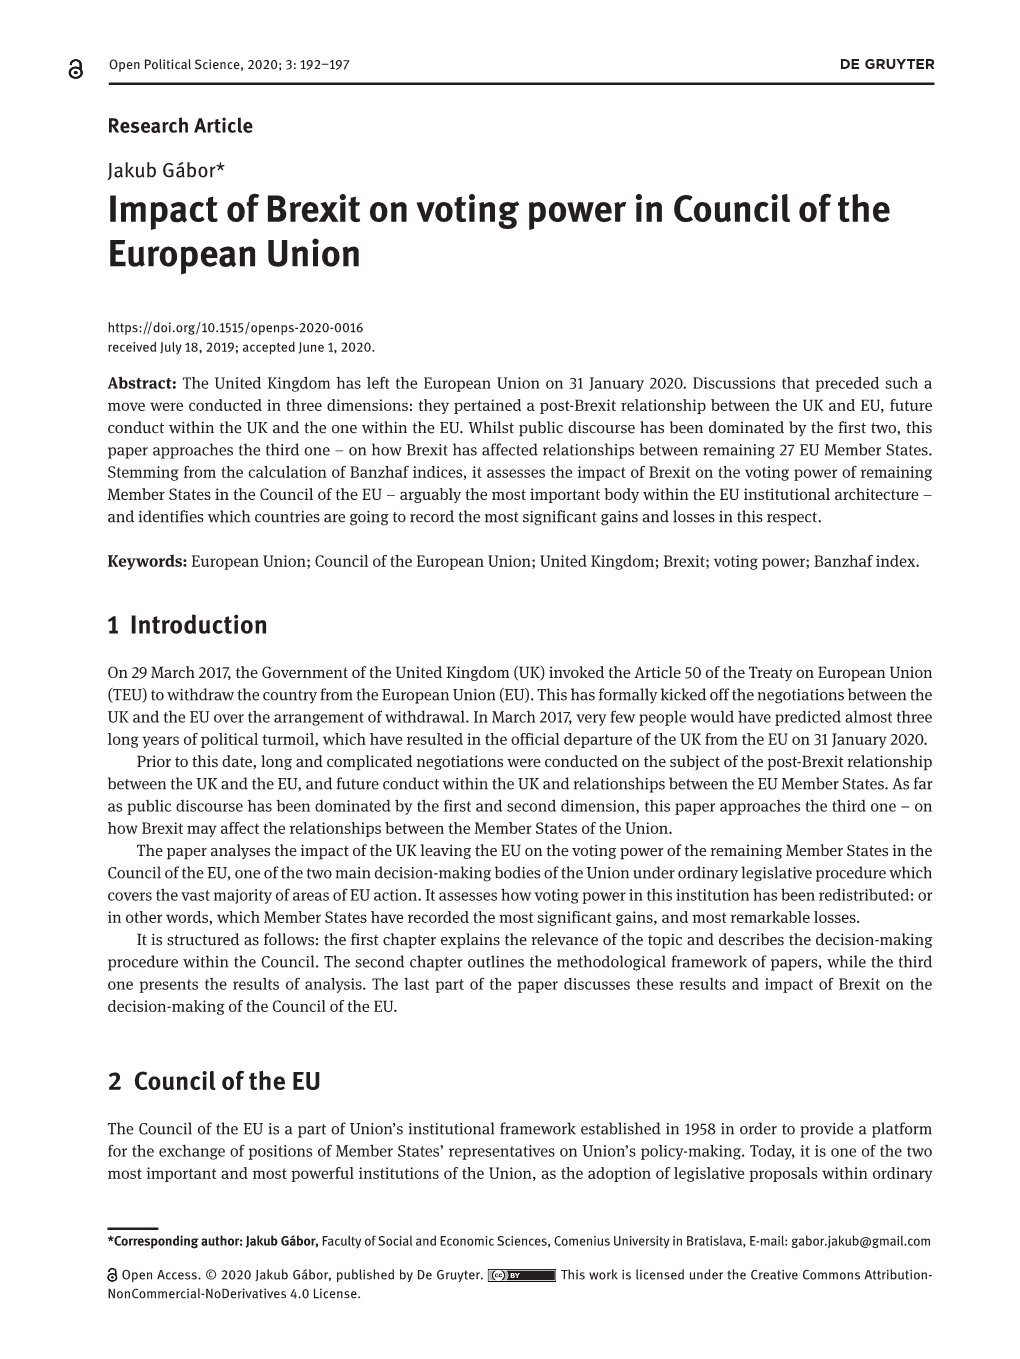 Impact of Brexit on Voting Power in Council of the European Union